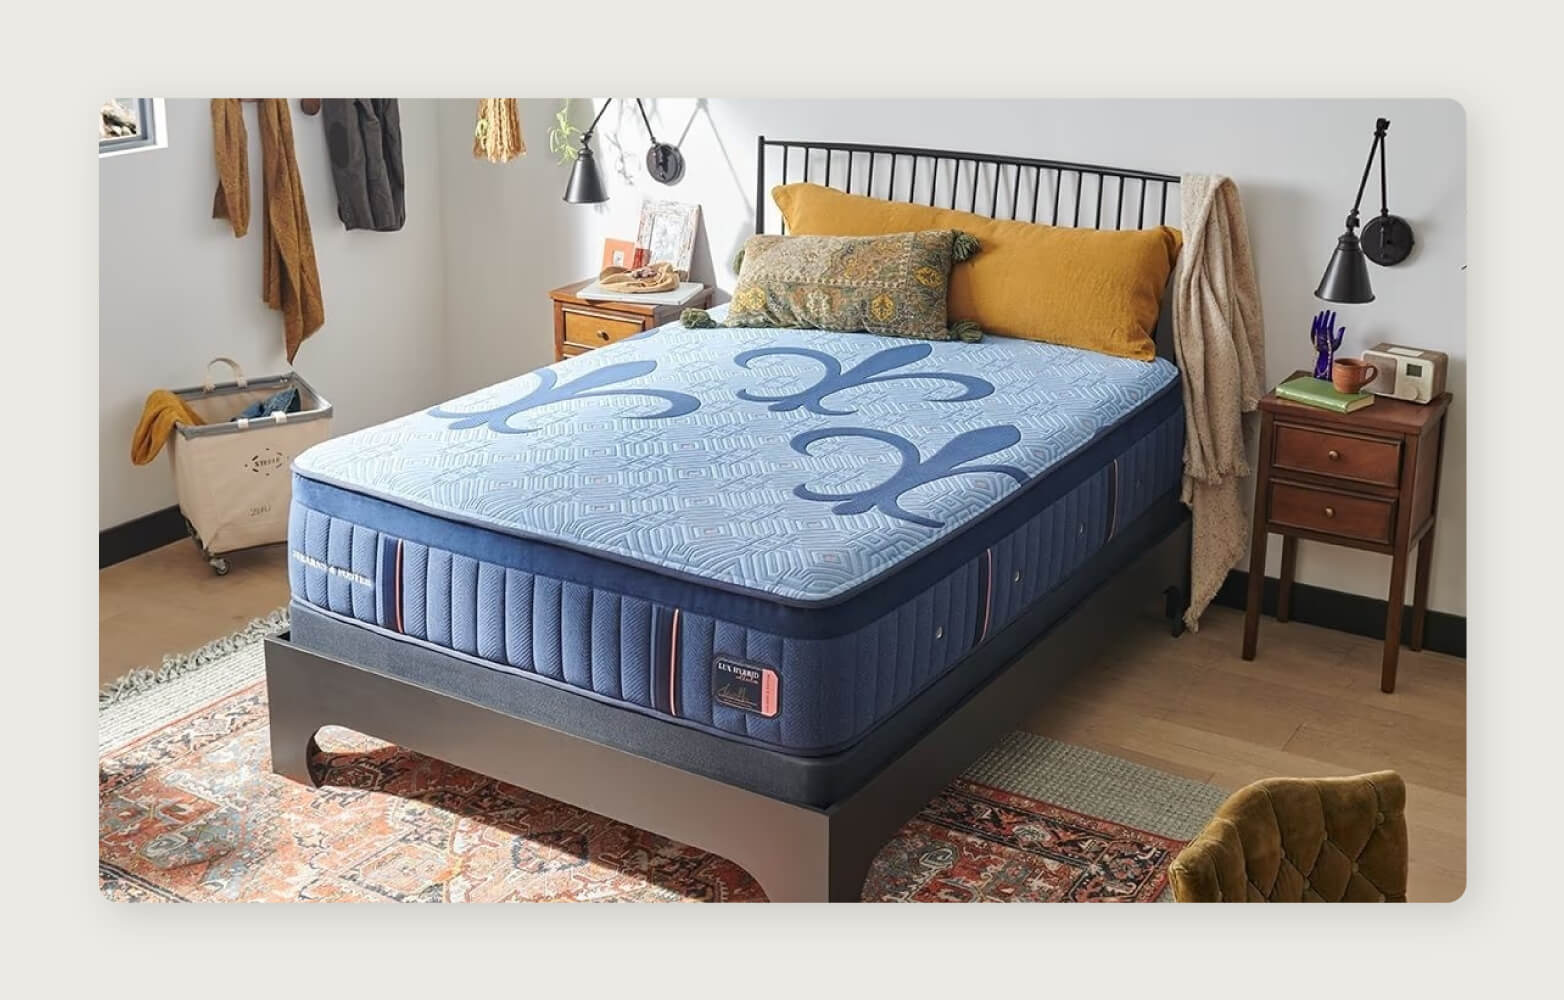 A blue Stearns & Foster Lux Hybrid mattress with pillows on a dark wood mid-century modern bed frame over a Persian-style rug.